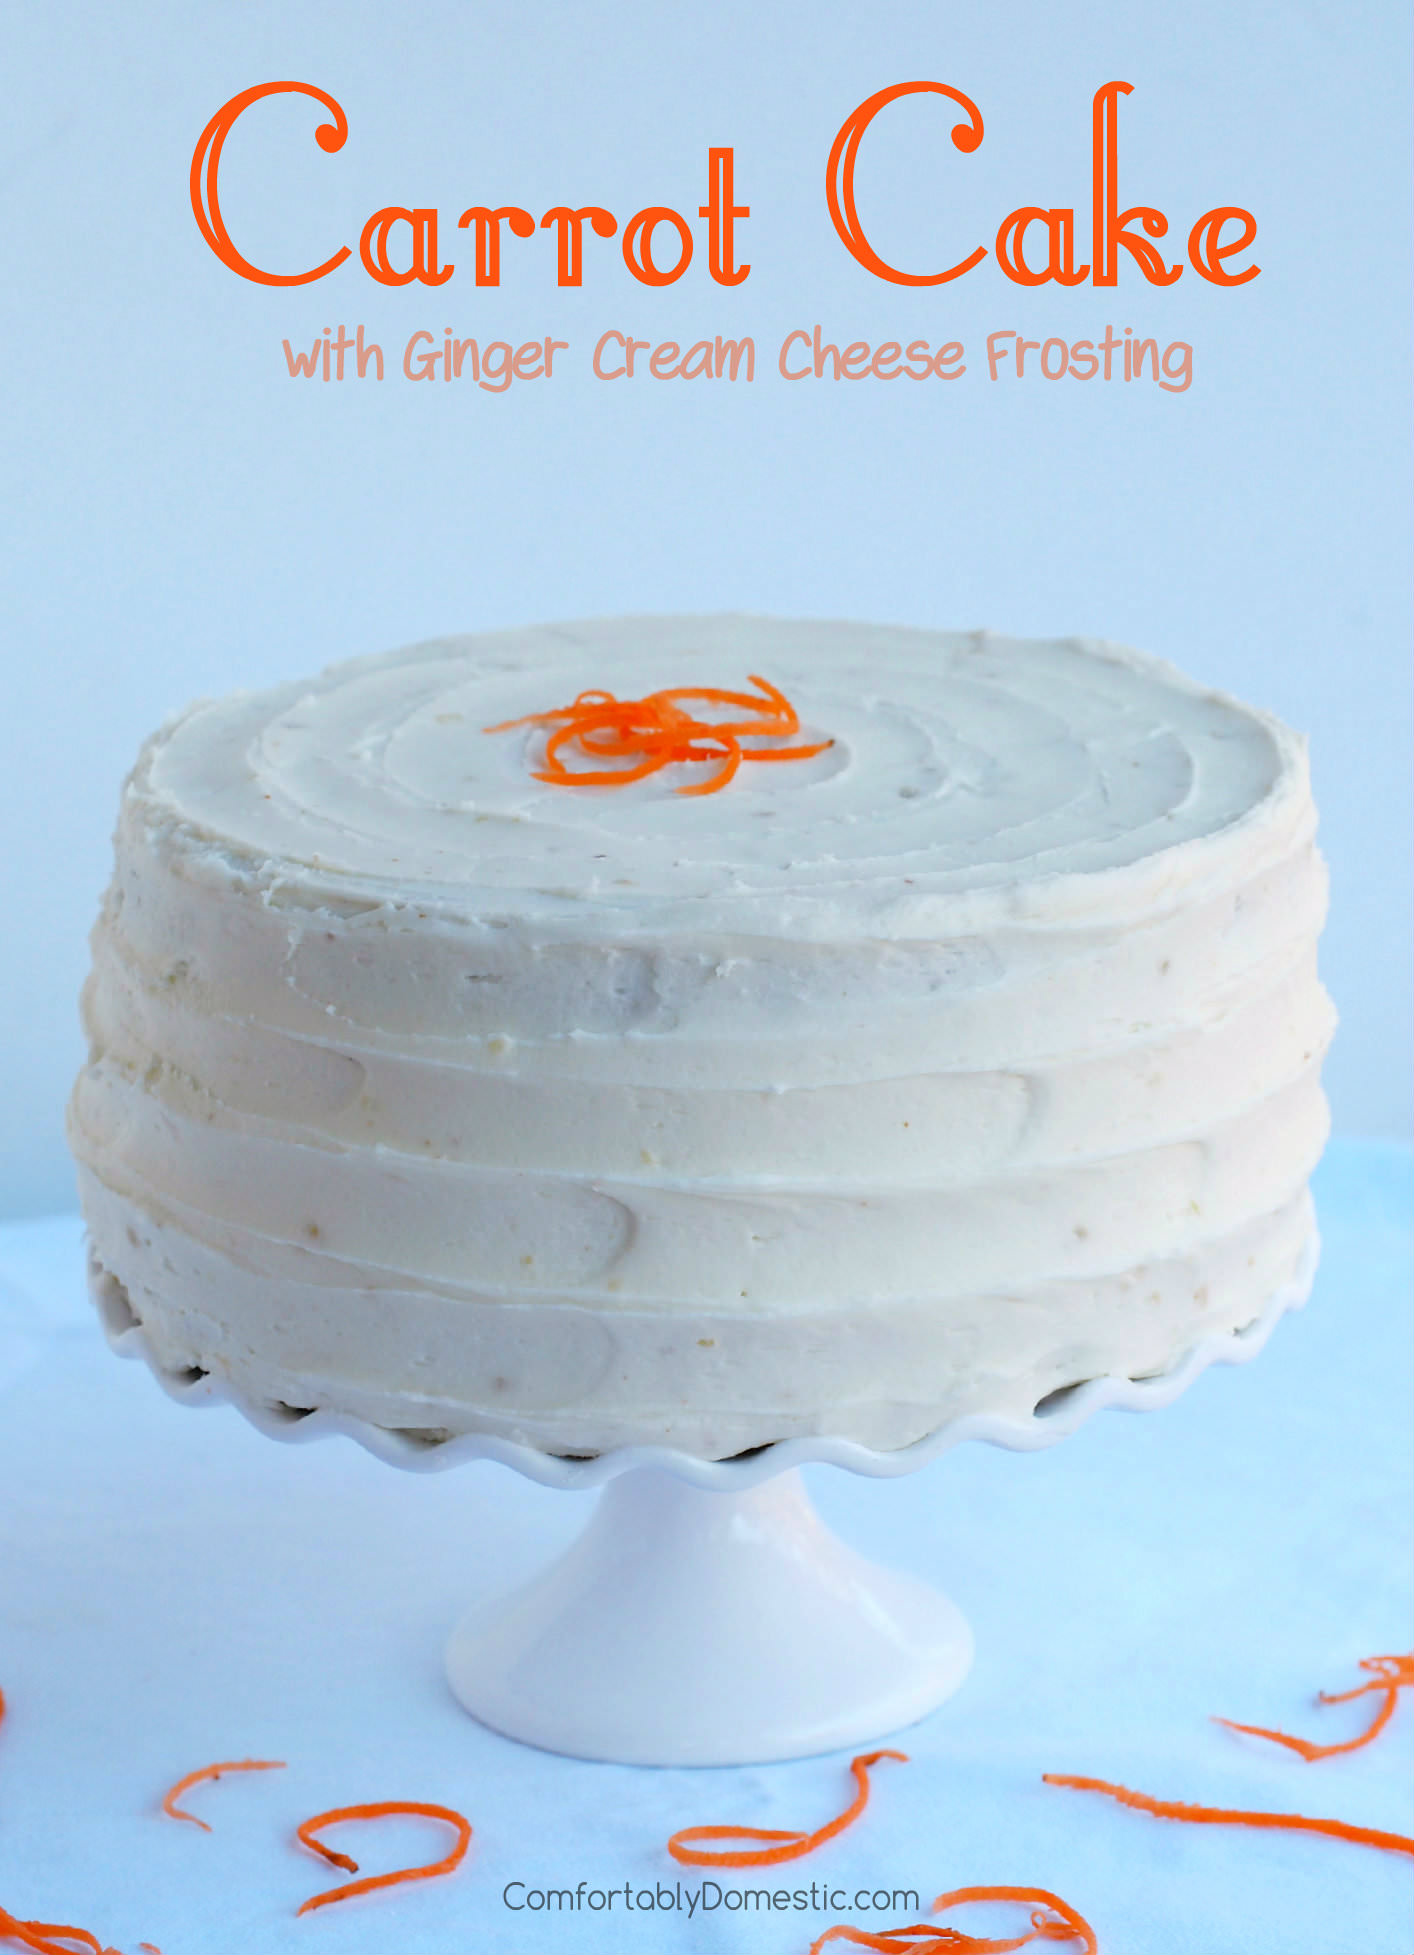 Carrot Cake with Ginger Cream Cheese Frosting | ComfortablyDomestic.com